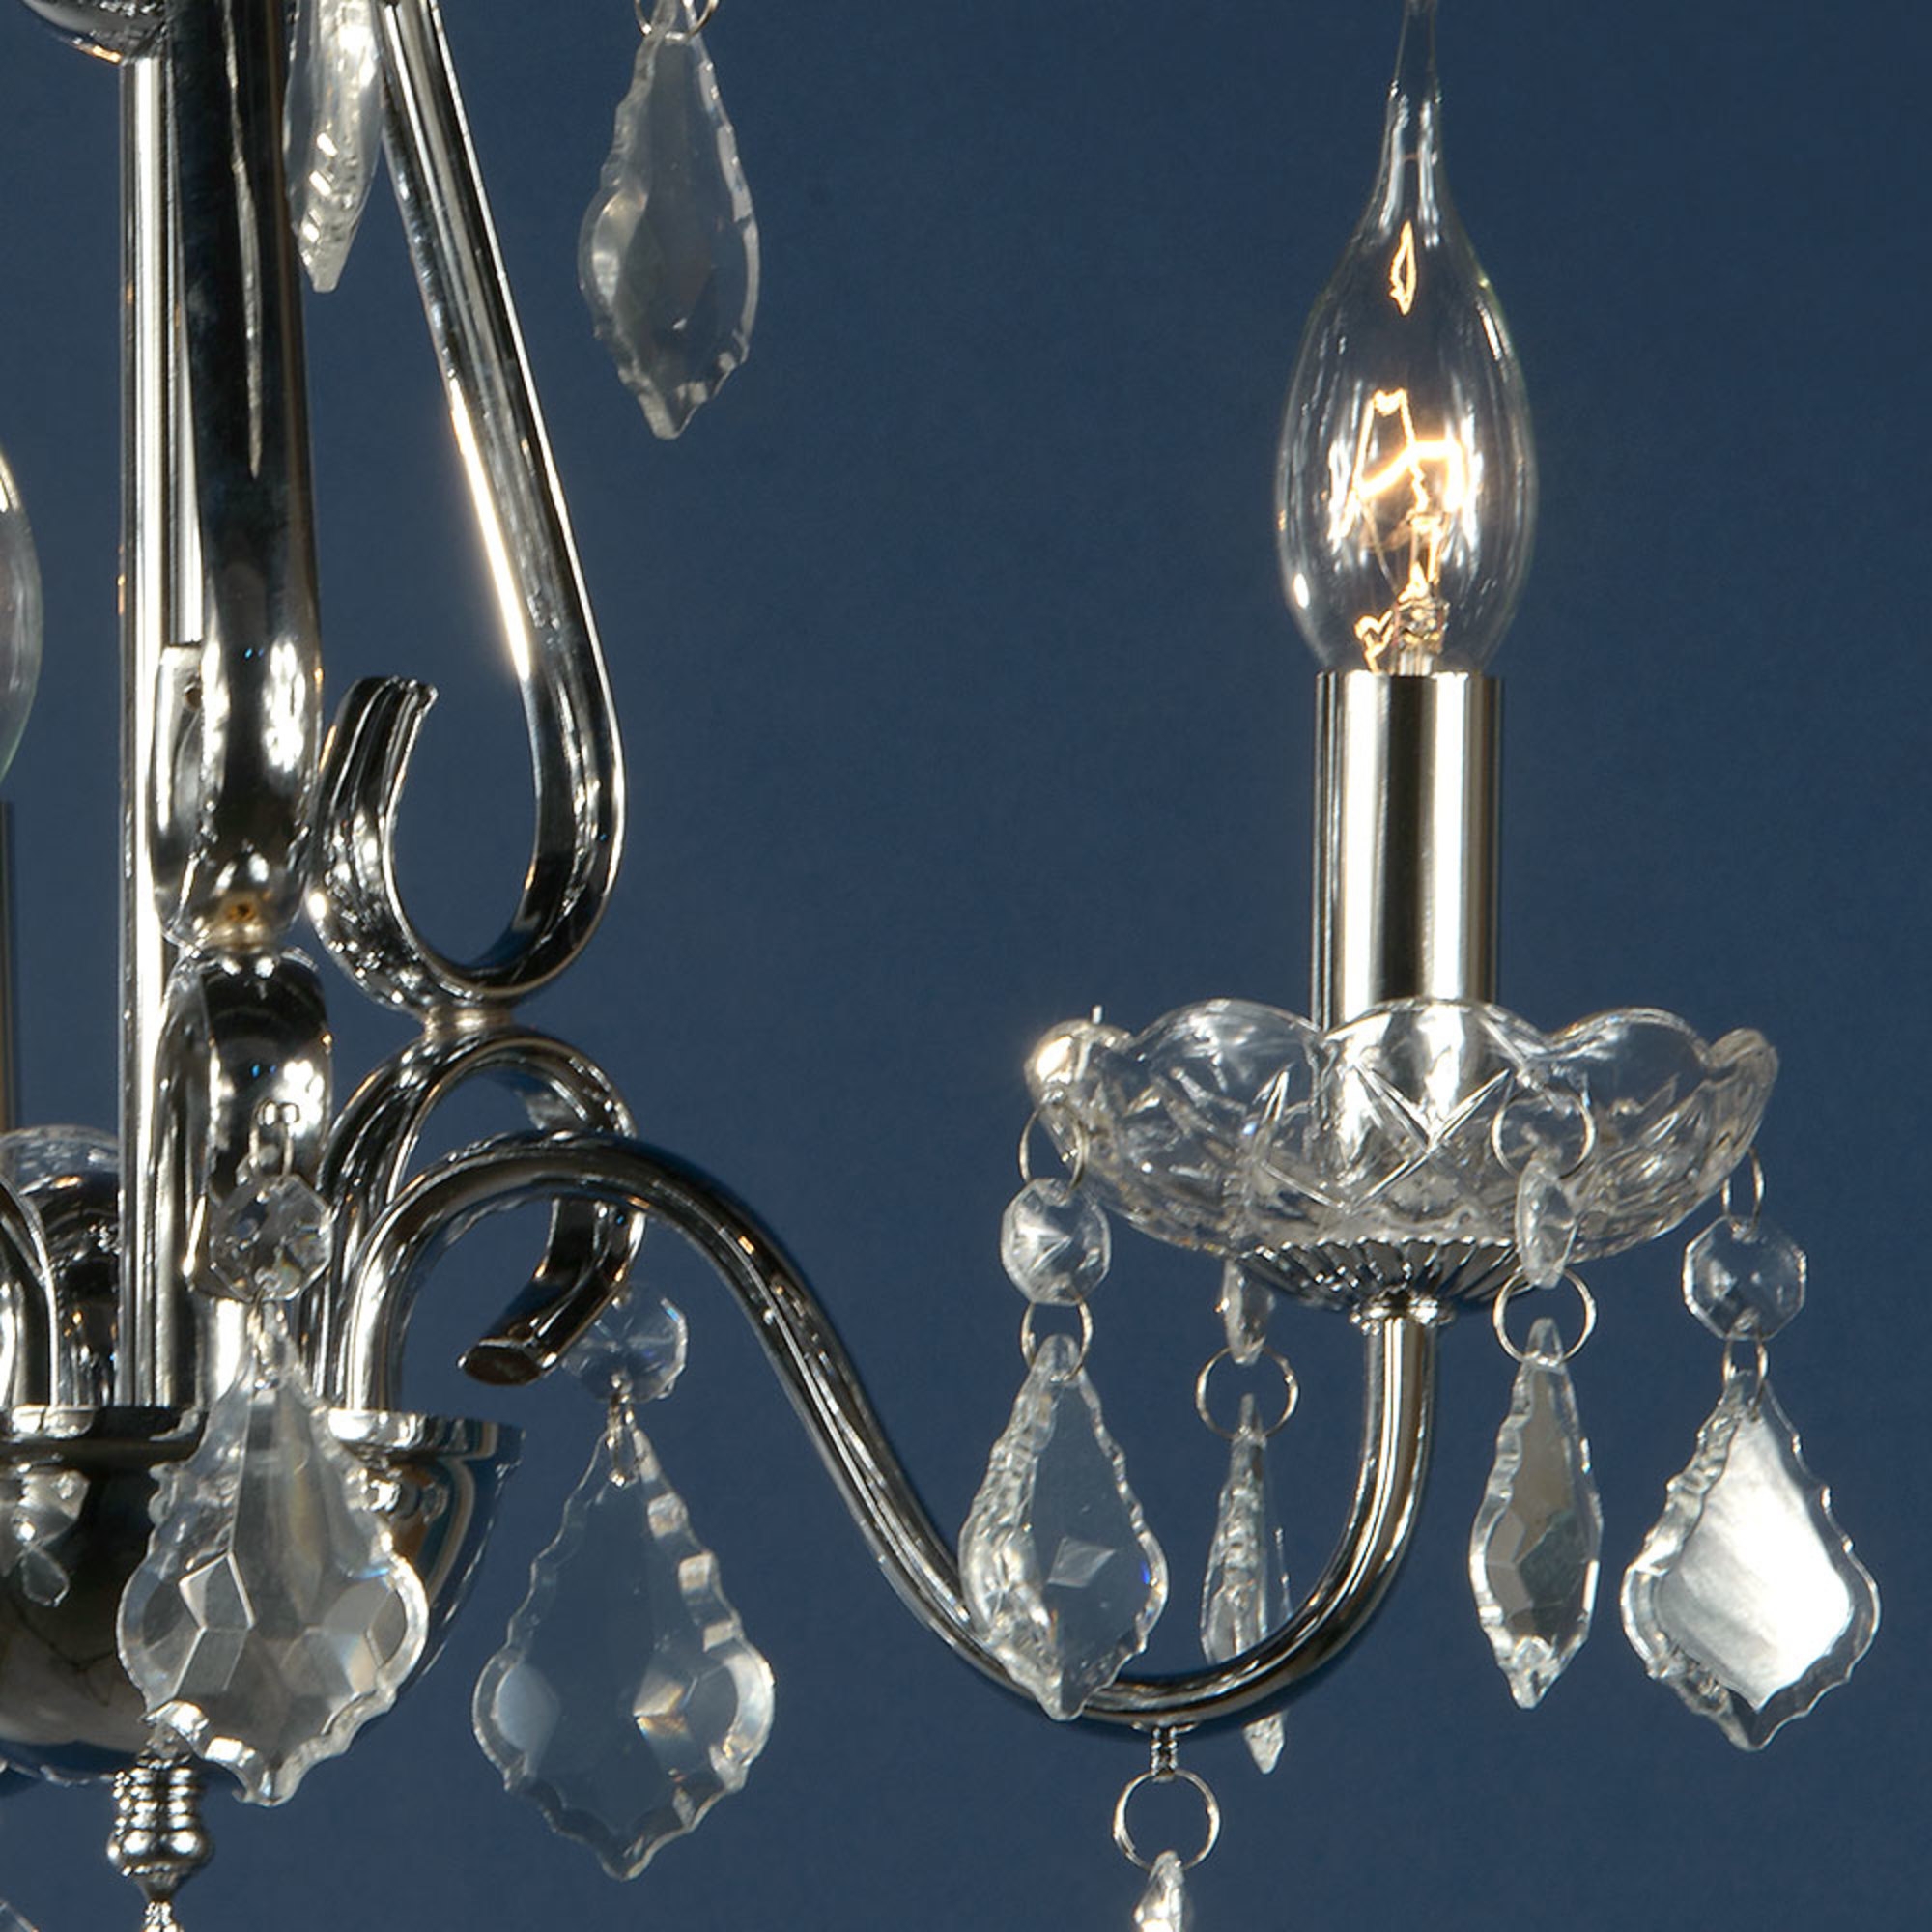 Vintage 3 Light Chandelier - Chrome and Clear